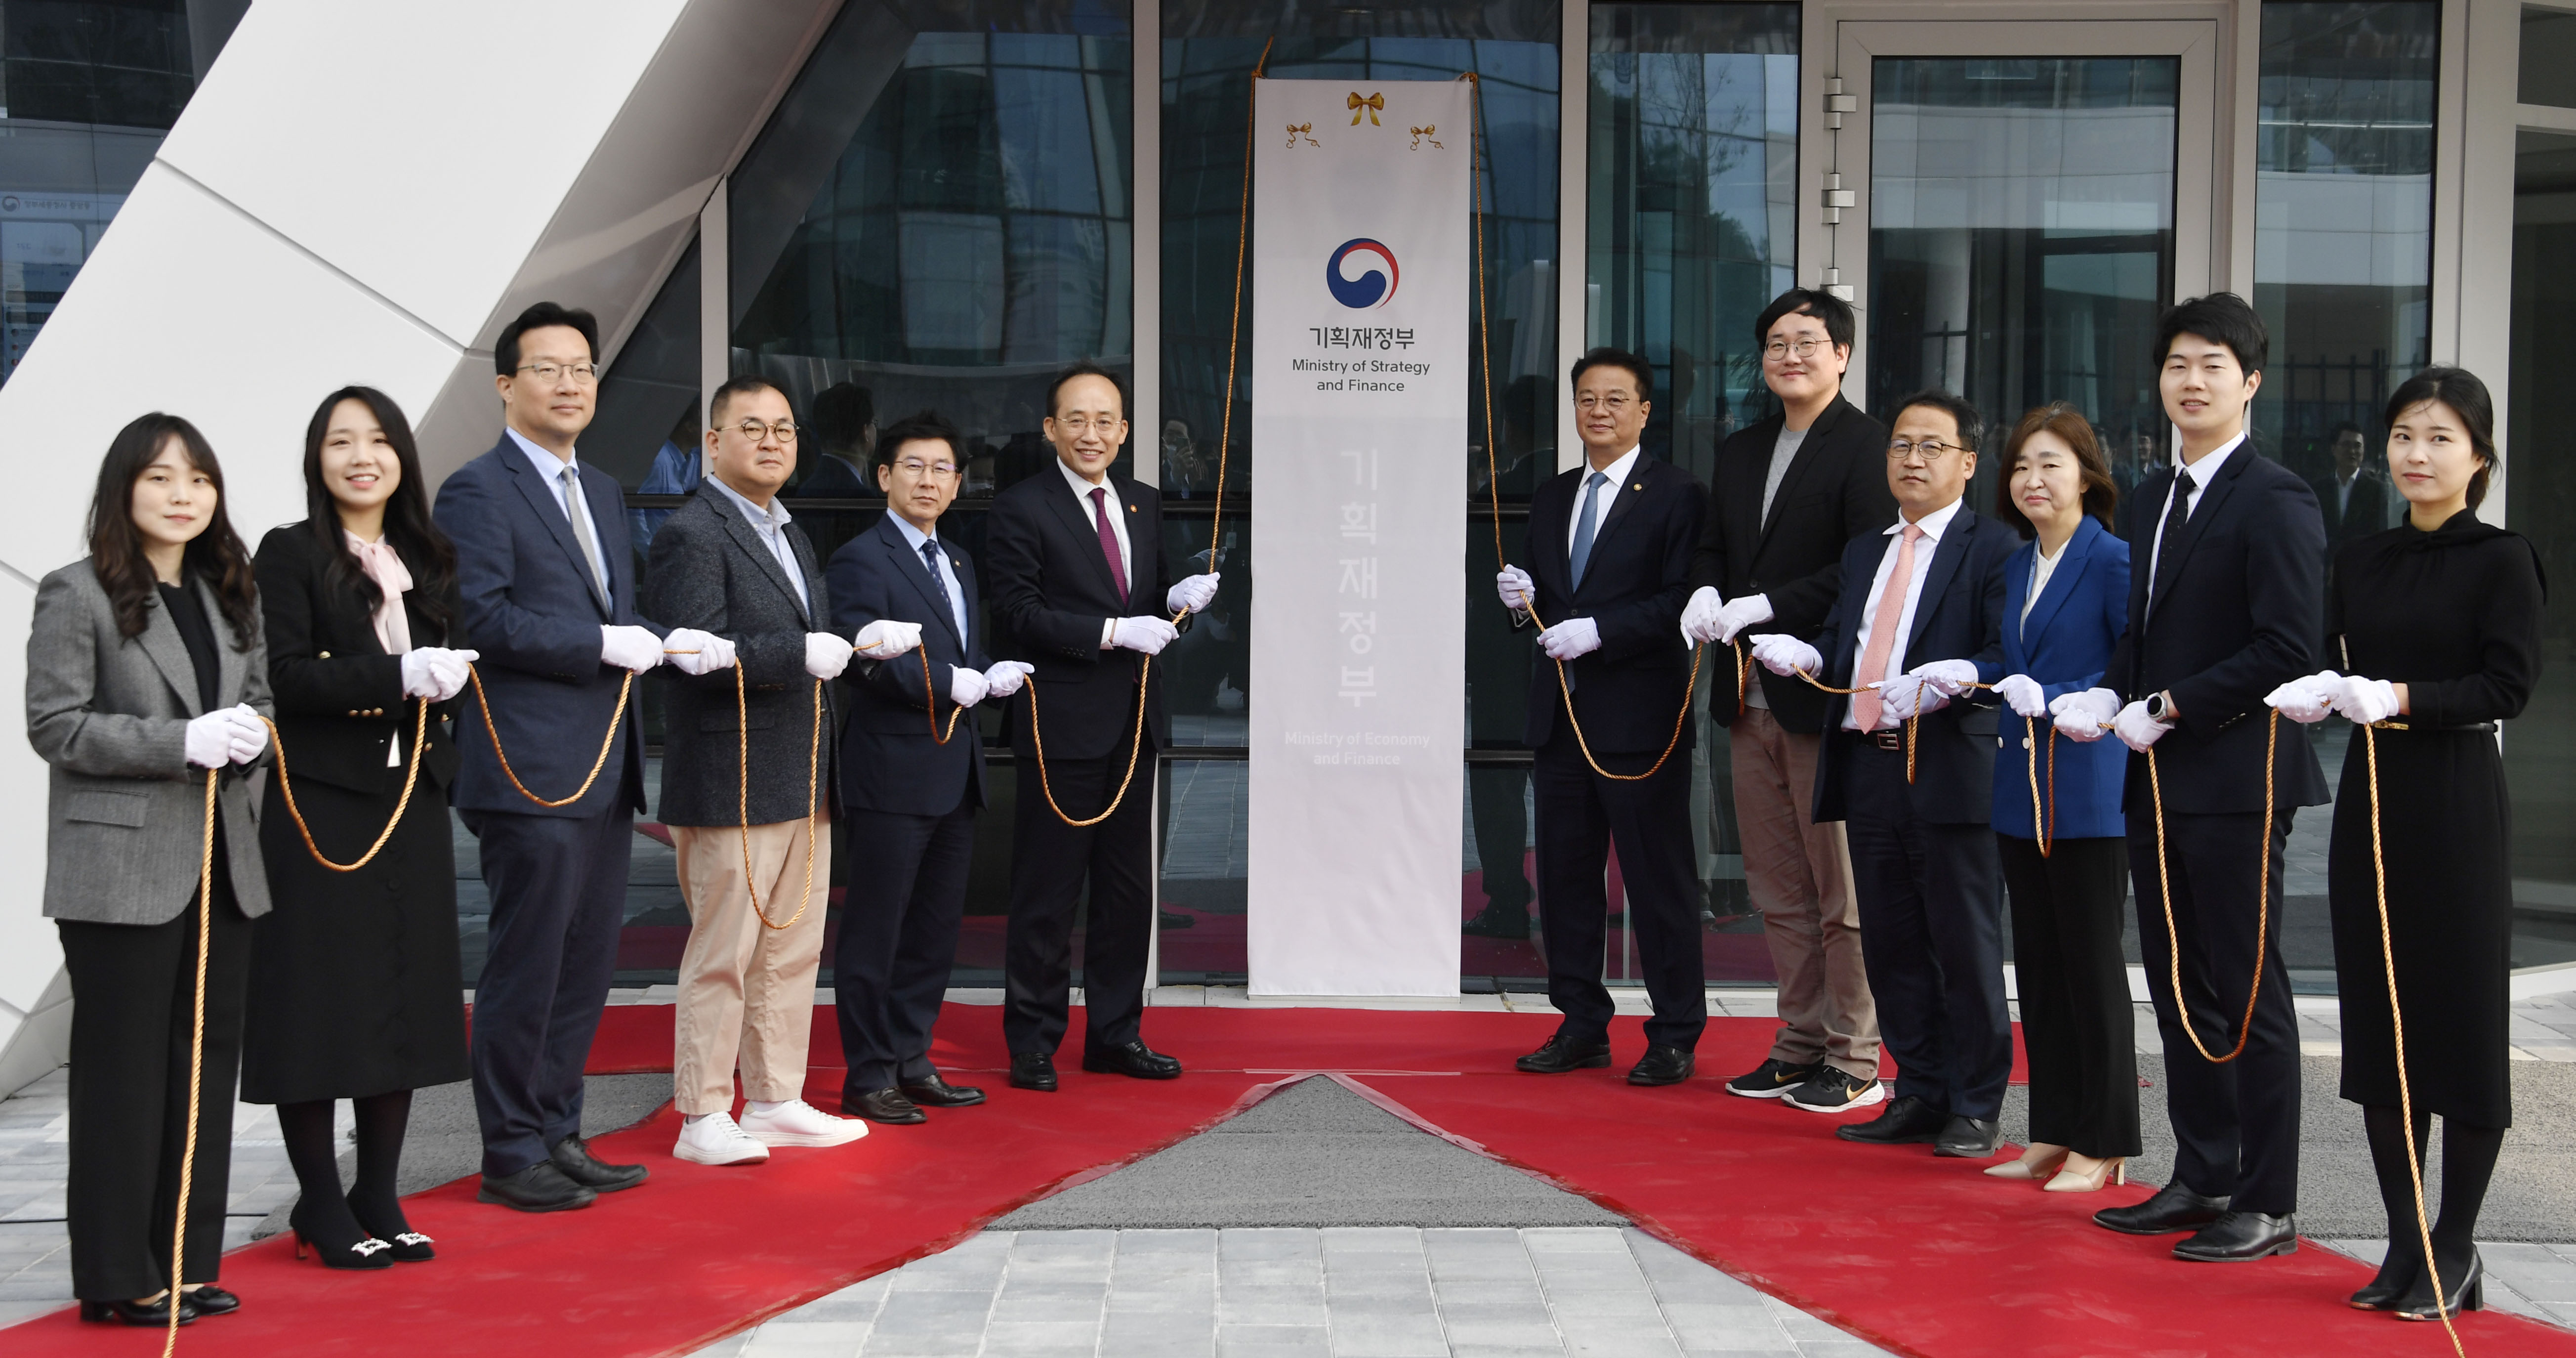 DPM CHOO unveiled the signboard of the Ministry of Economy and Finance with the Vice Ministers and MOEF staff at Sejong Government Complex on March 9.